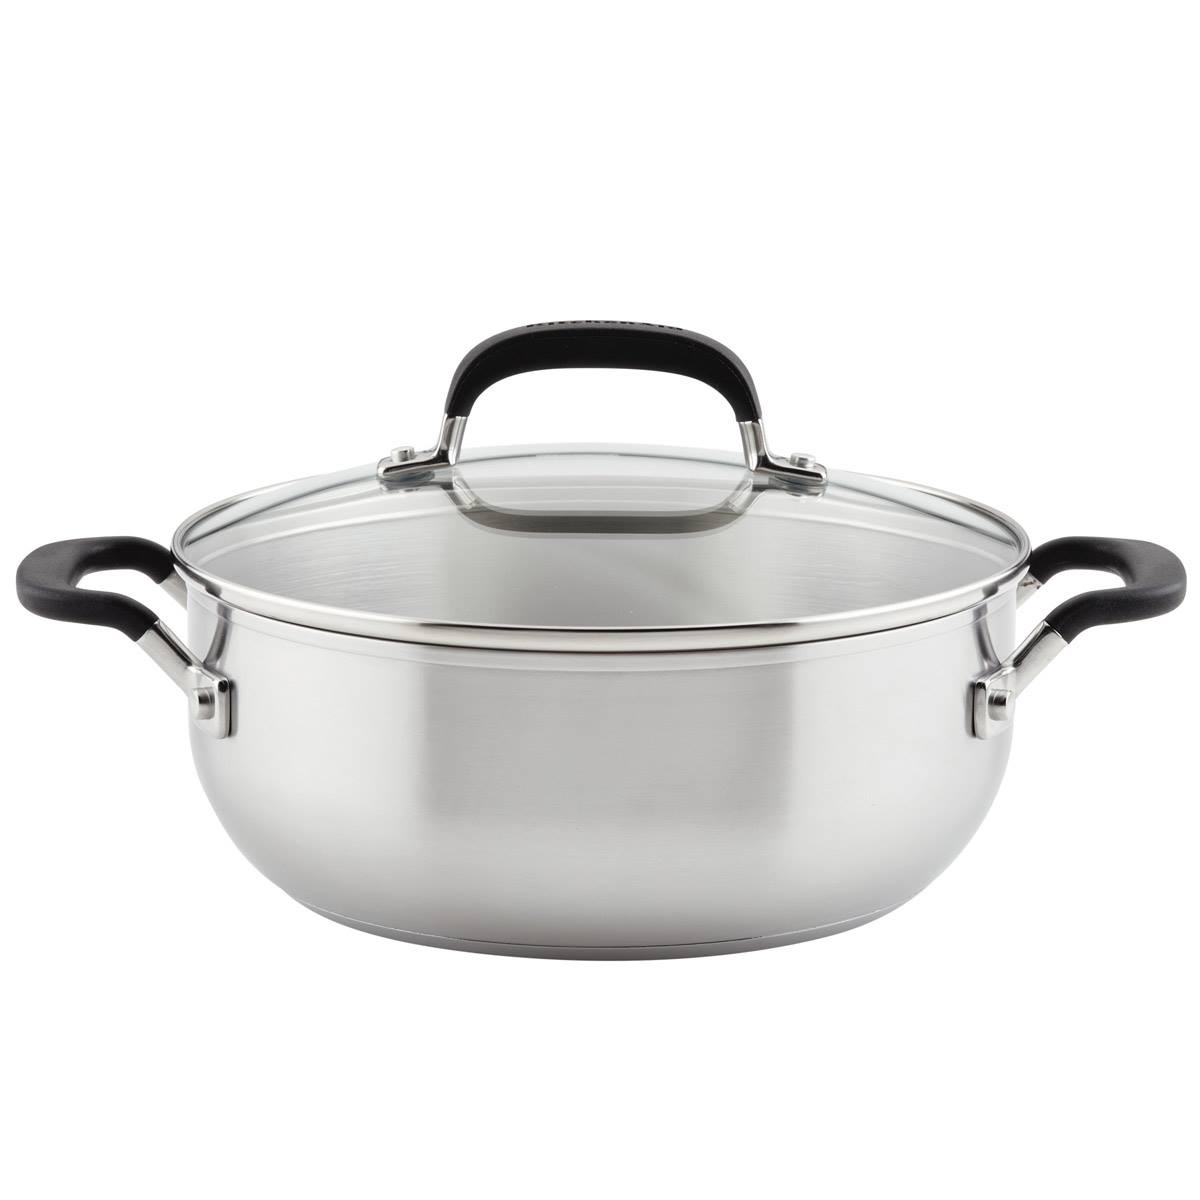 KitchenAid(R) Stainless Steel Covered Casserole - 4qt.